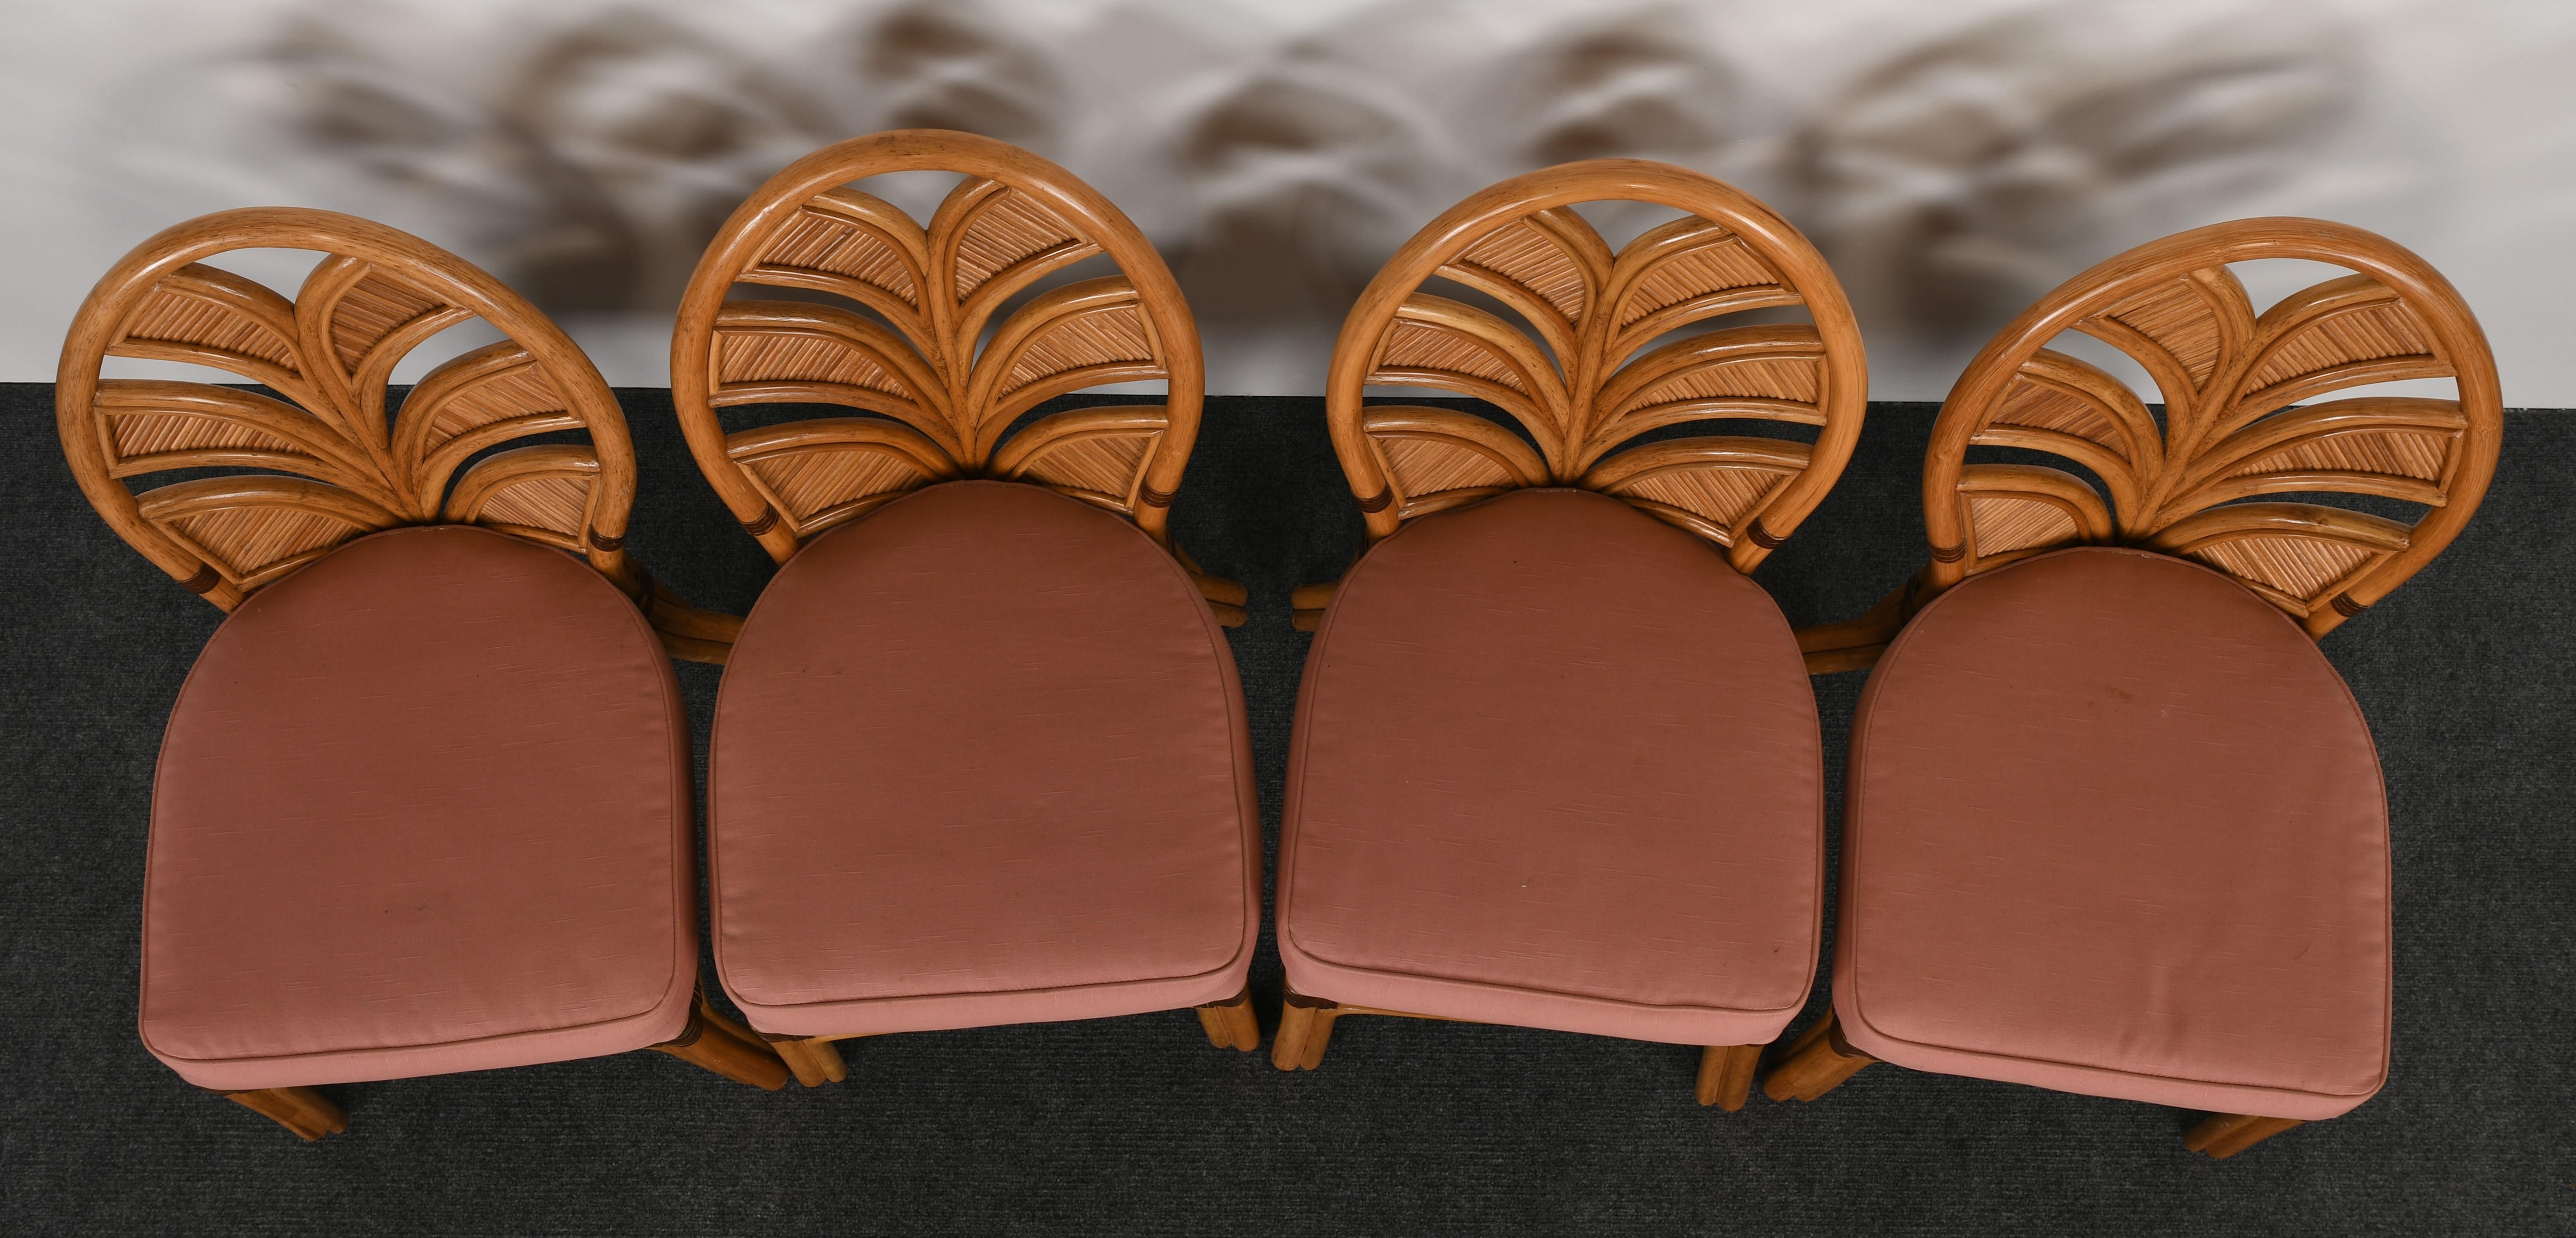 A stylish set of six rattan dining chairs with palm leaf design and leather wrapped detail. Very comfortable and functional. Good condition with age appropriate wear. New upholstery recommended.

Side chair dimensions: 38